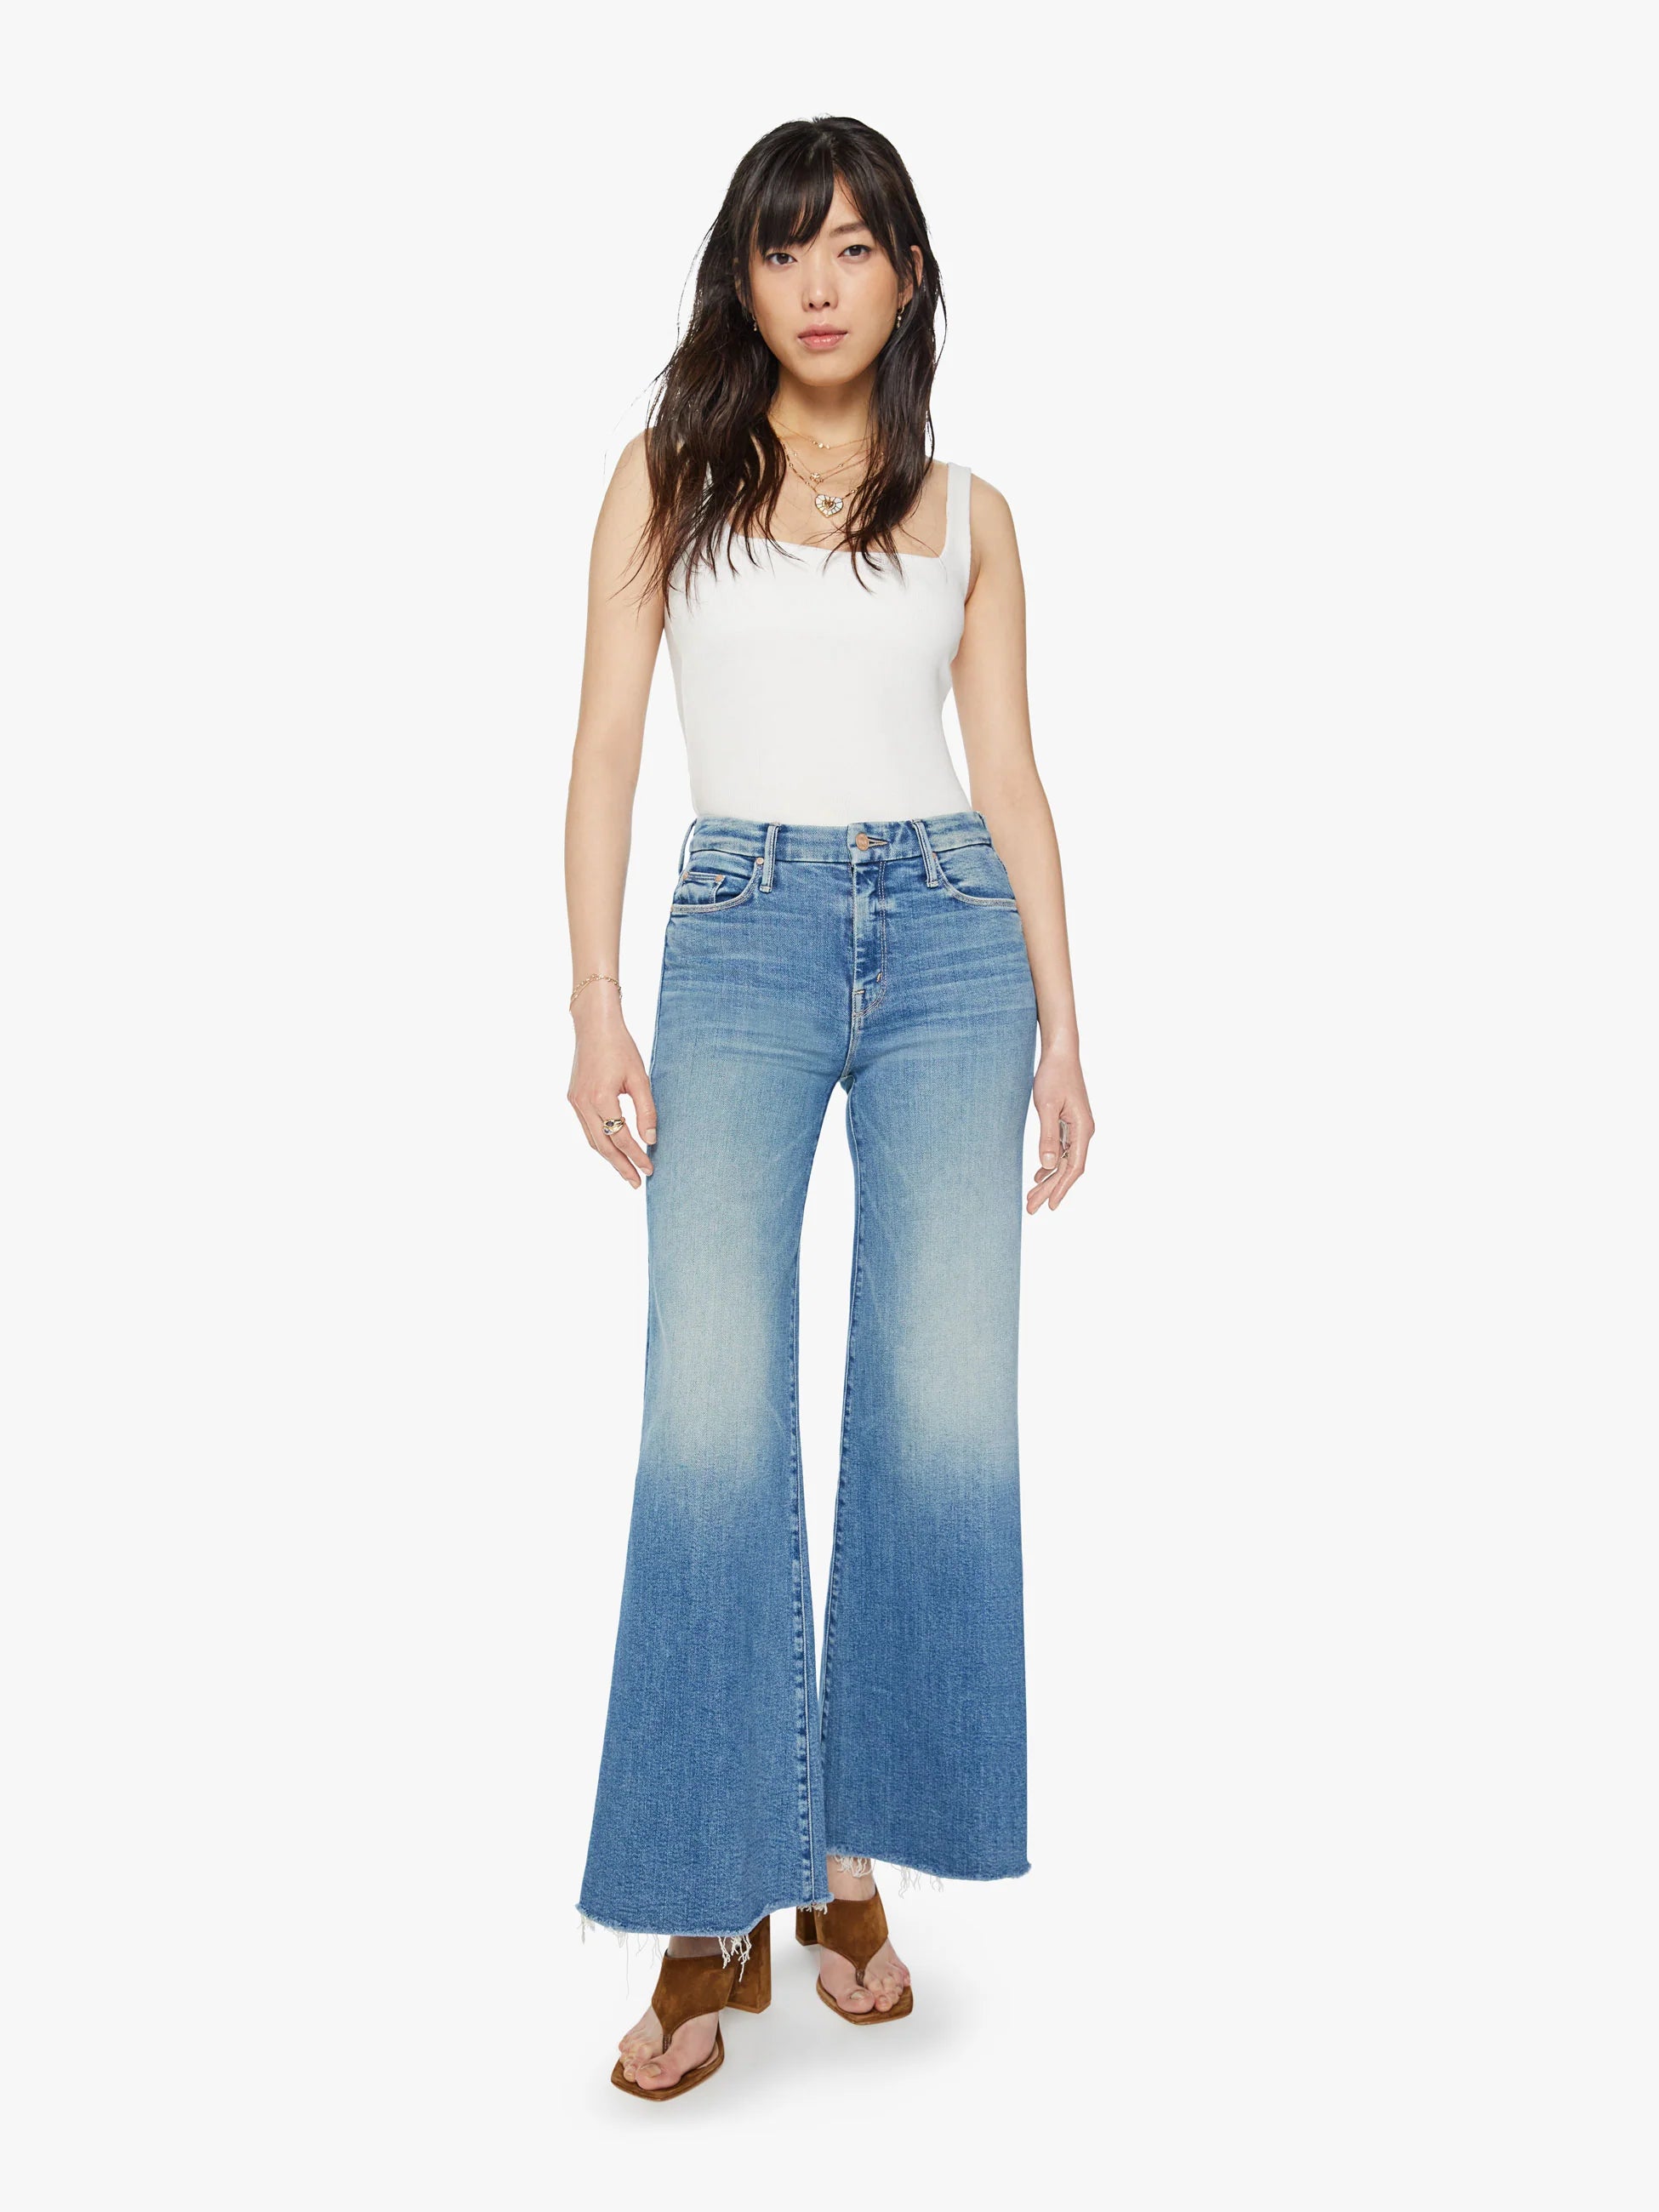 A real cliffhanger. This iconic high-waisted wide leg has a 31-inch inseam and a frayed hem. Cut from stretch denim, Riding The Cliffside is a mid-blue wash with whiskering and fading.  10" Rise 31" Inseam 26" Leg Opening  Model is 5' 10" wears size 26 or small bottoms and size small shirts.  78% Cotton 16% Modal 4% Polyester 2% Elastane